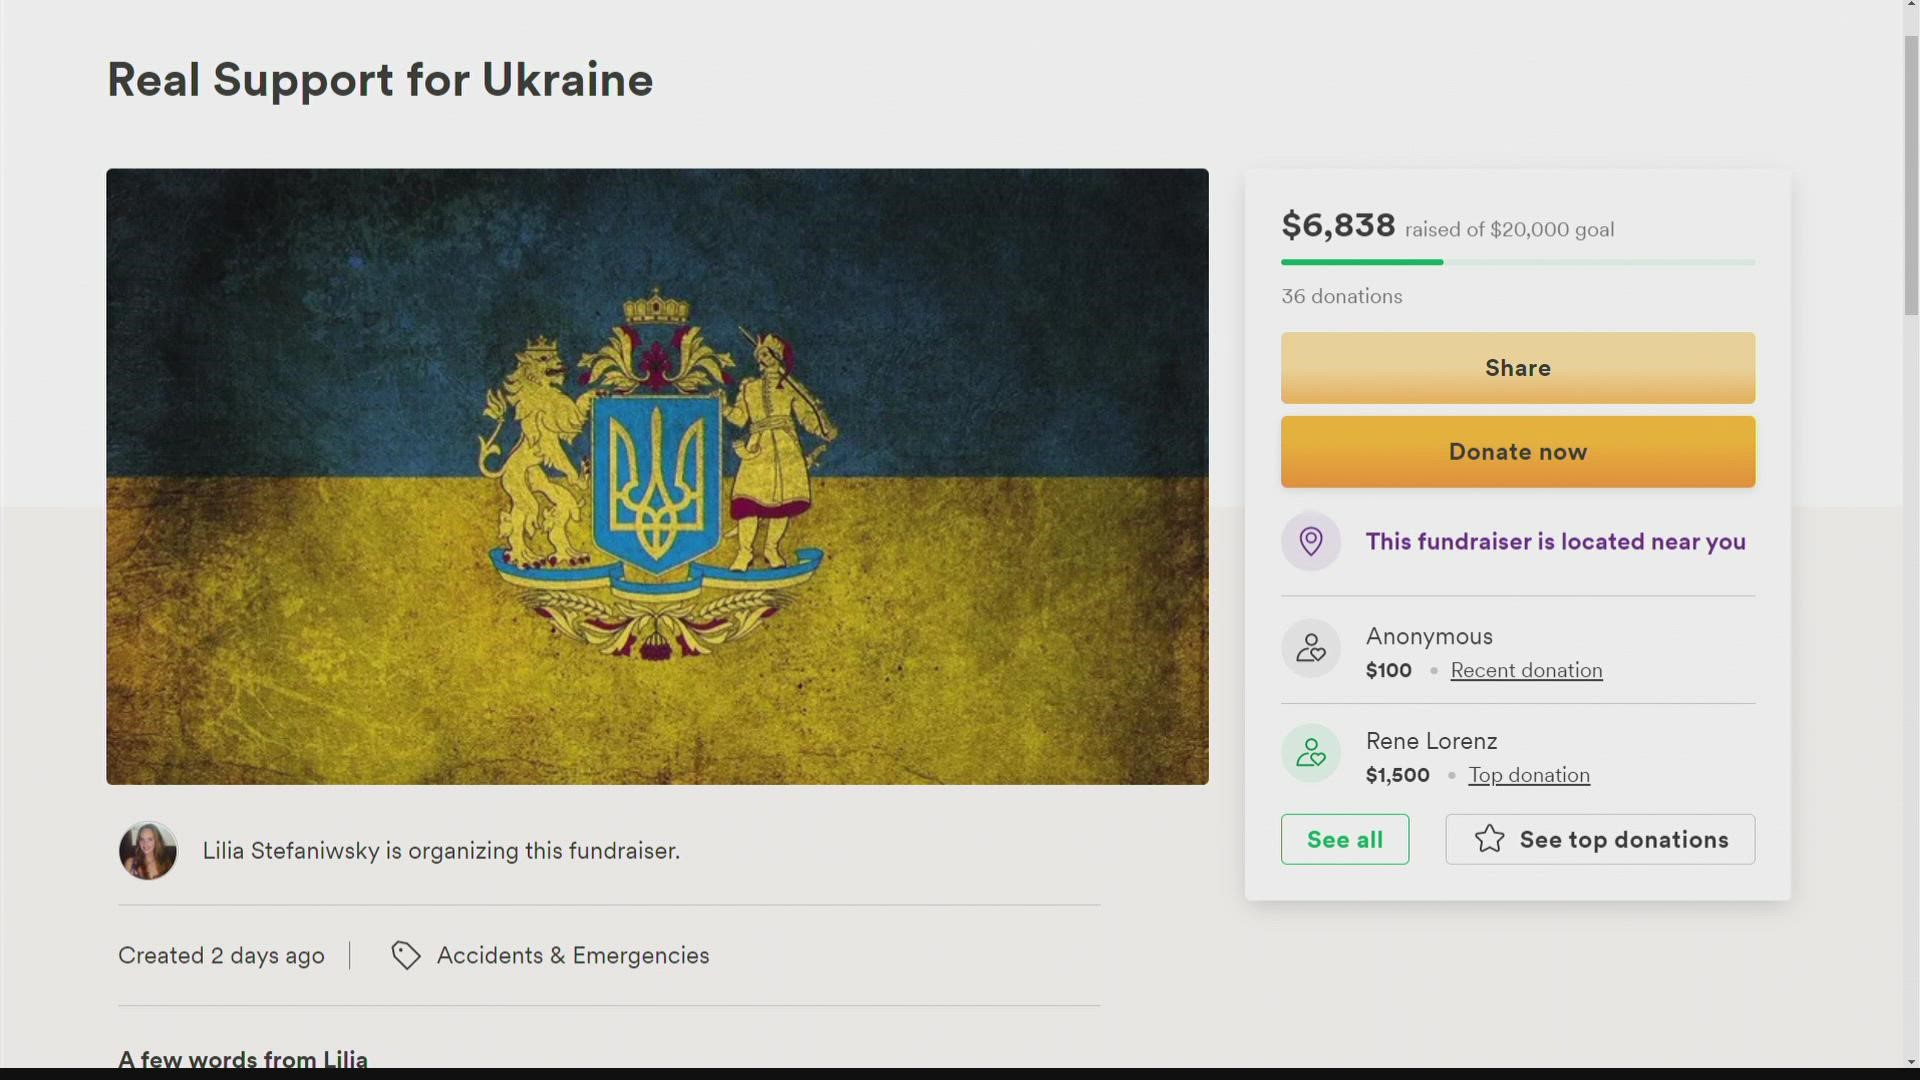 Dr. Stefaniwsky set up the GoFundMe page with hopes of purchasing a van to transport humanitarian & medical supplies from western Ukraine (Lviv) to Kyiv.